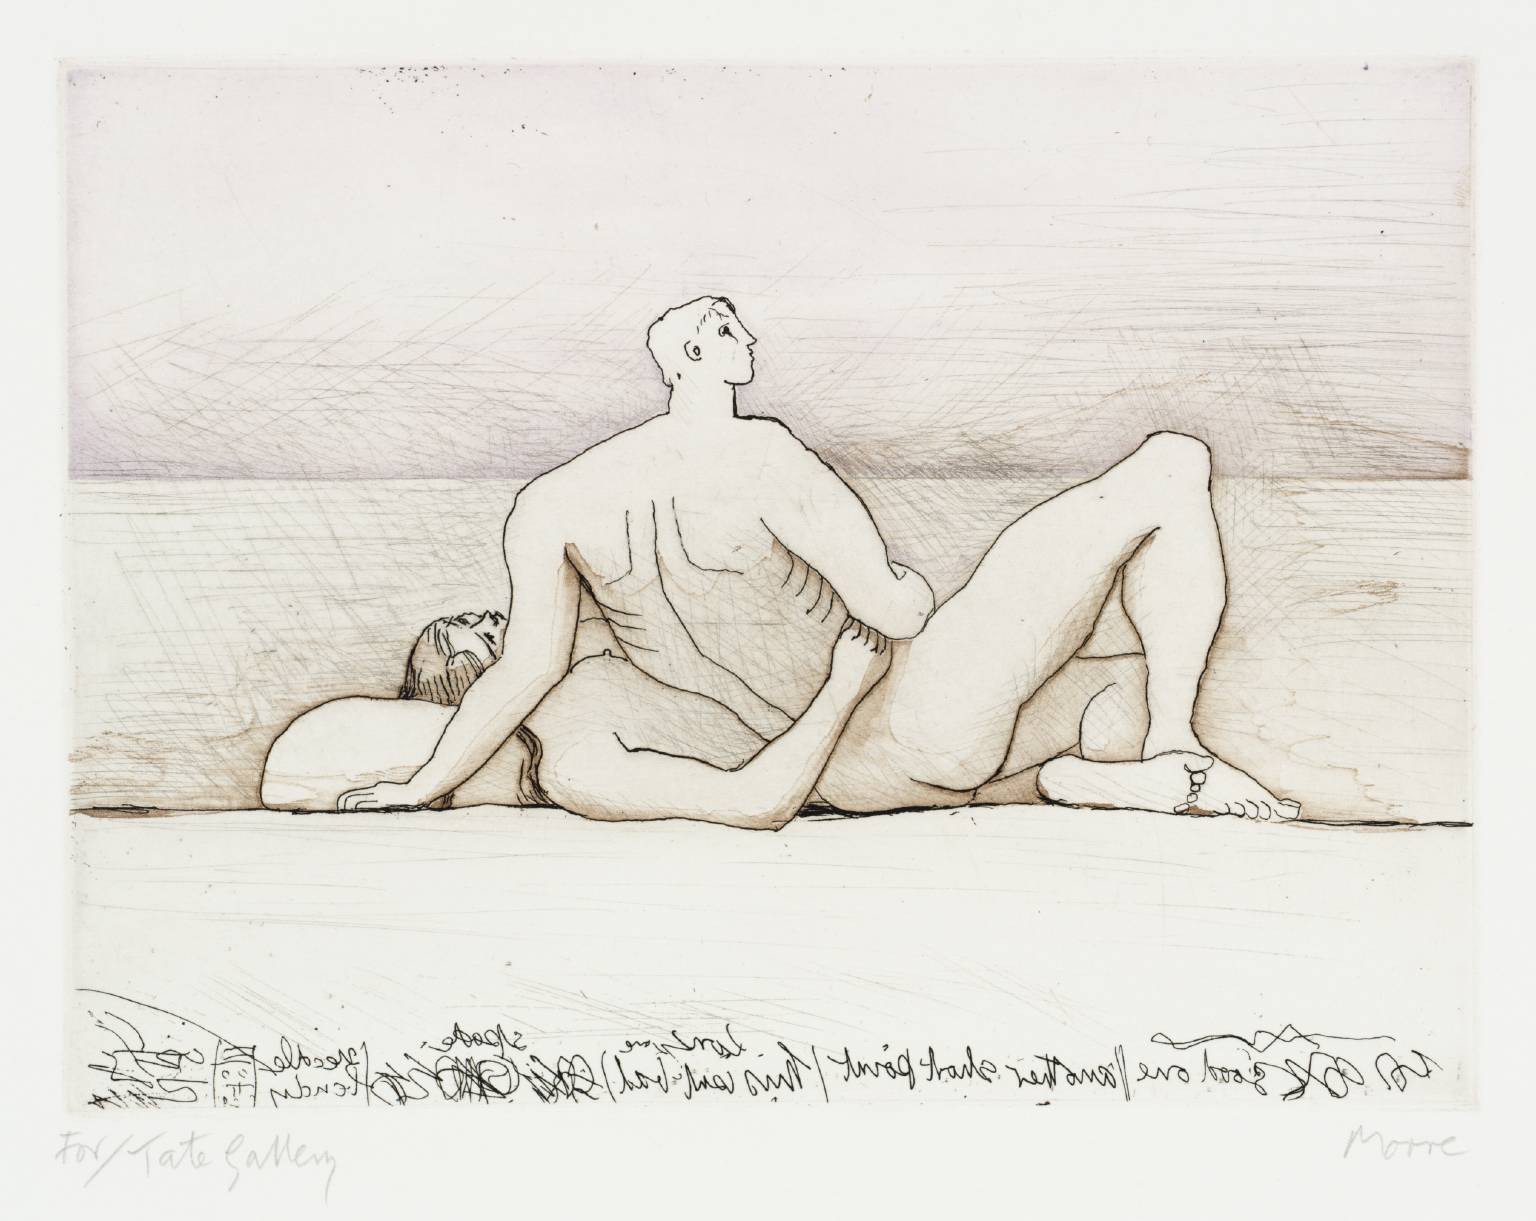 Reclining Figures, Man And Woman 1 by Henry Moore, 1975